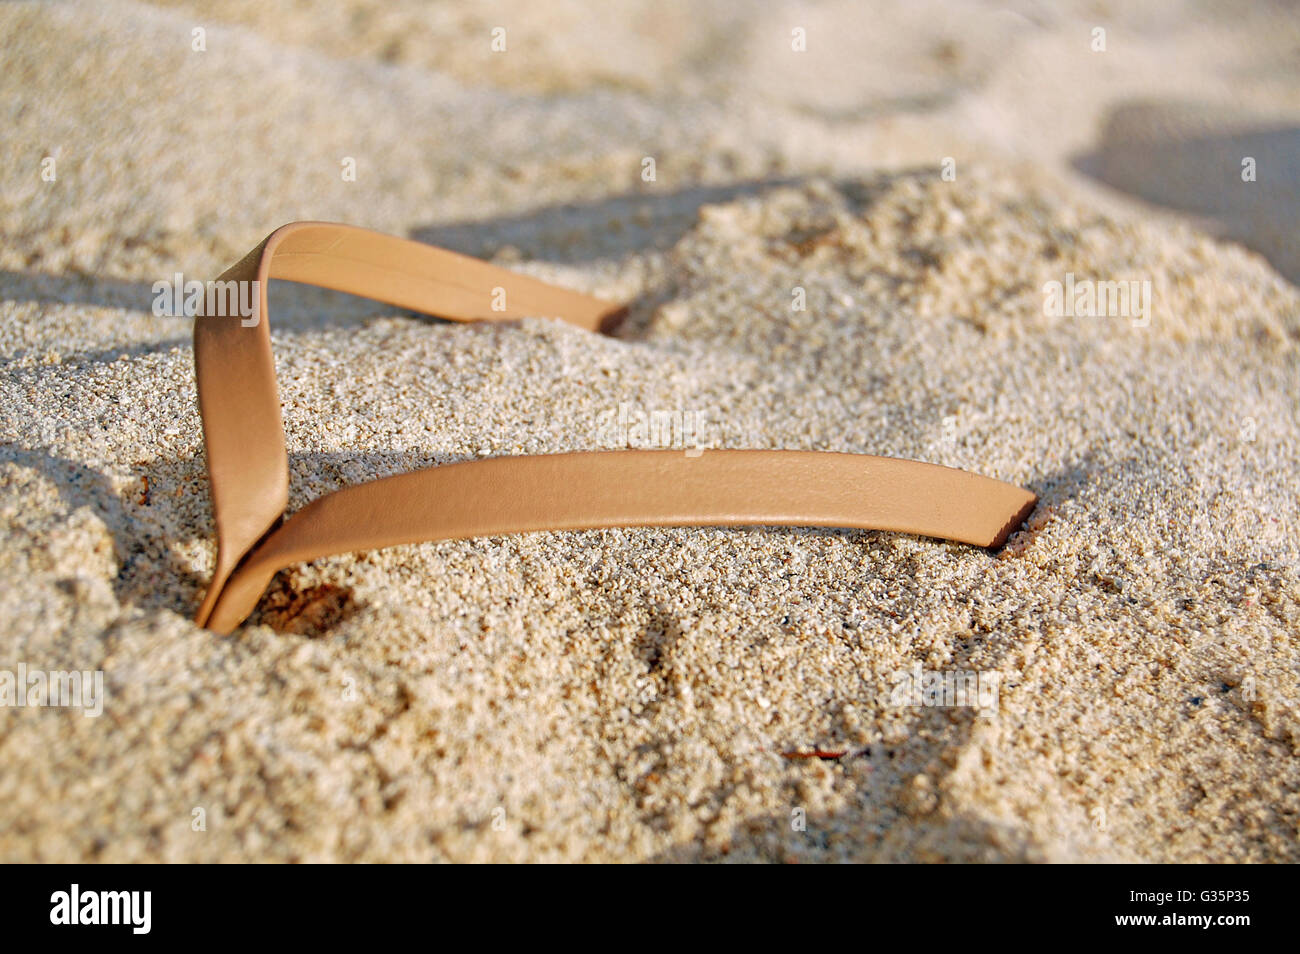 Thong sandal in the sand Stock Photo